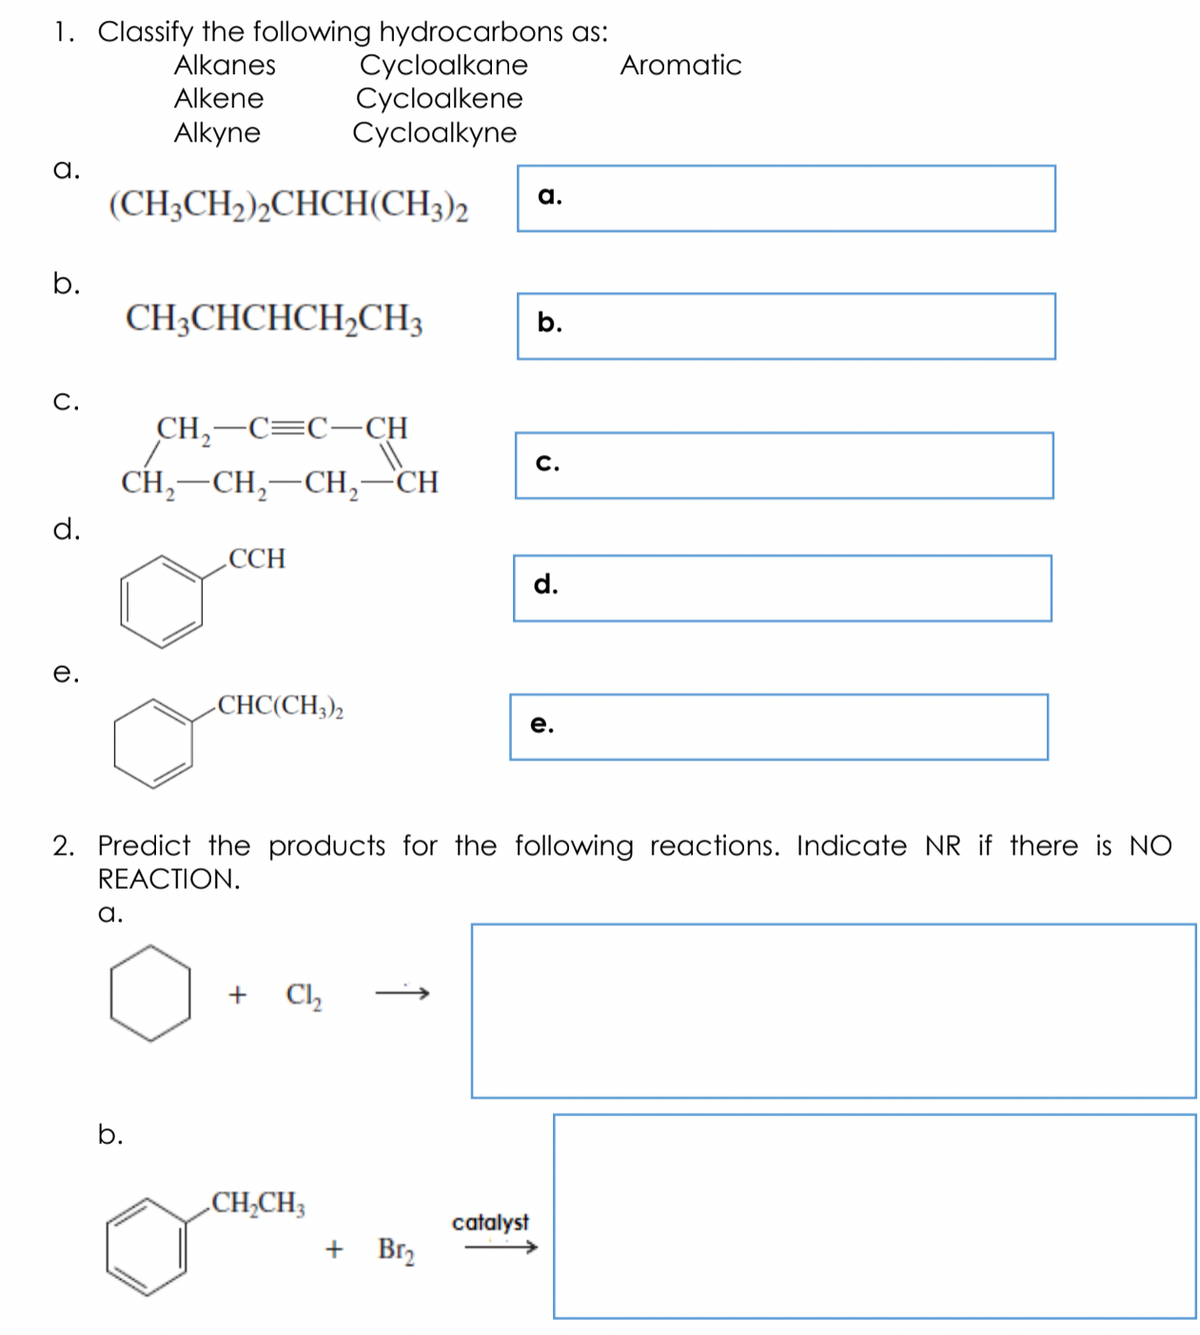 1. Classify the following hydrocarbons as:
Cycloalkane
Cycloalkene
Cycloalkyne
Alkanes
Aromatic
Alkene
Alkyne
a.
(CH3CH2)½CHCH(CH3)2
а.
b.
CH3CHCHCH2CH3
b.
C.
CH,-C=C-CH
C.
CH, —CH, —СH,
-CH
d.
.CCH
е.
-CHC(CH;),
е.
2. Predict the products for the following reactions. Indicate NR if there is NO
REACTION.
a.
+
Ch
b.
.CH;CH3
catalyst
+ Br2
d.
↑
